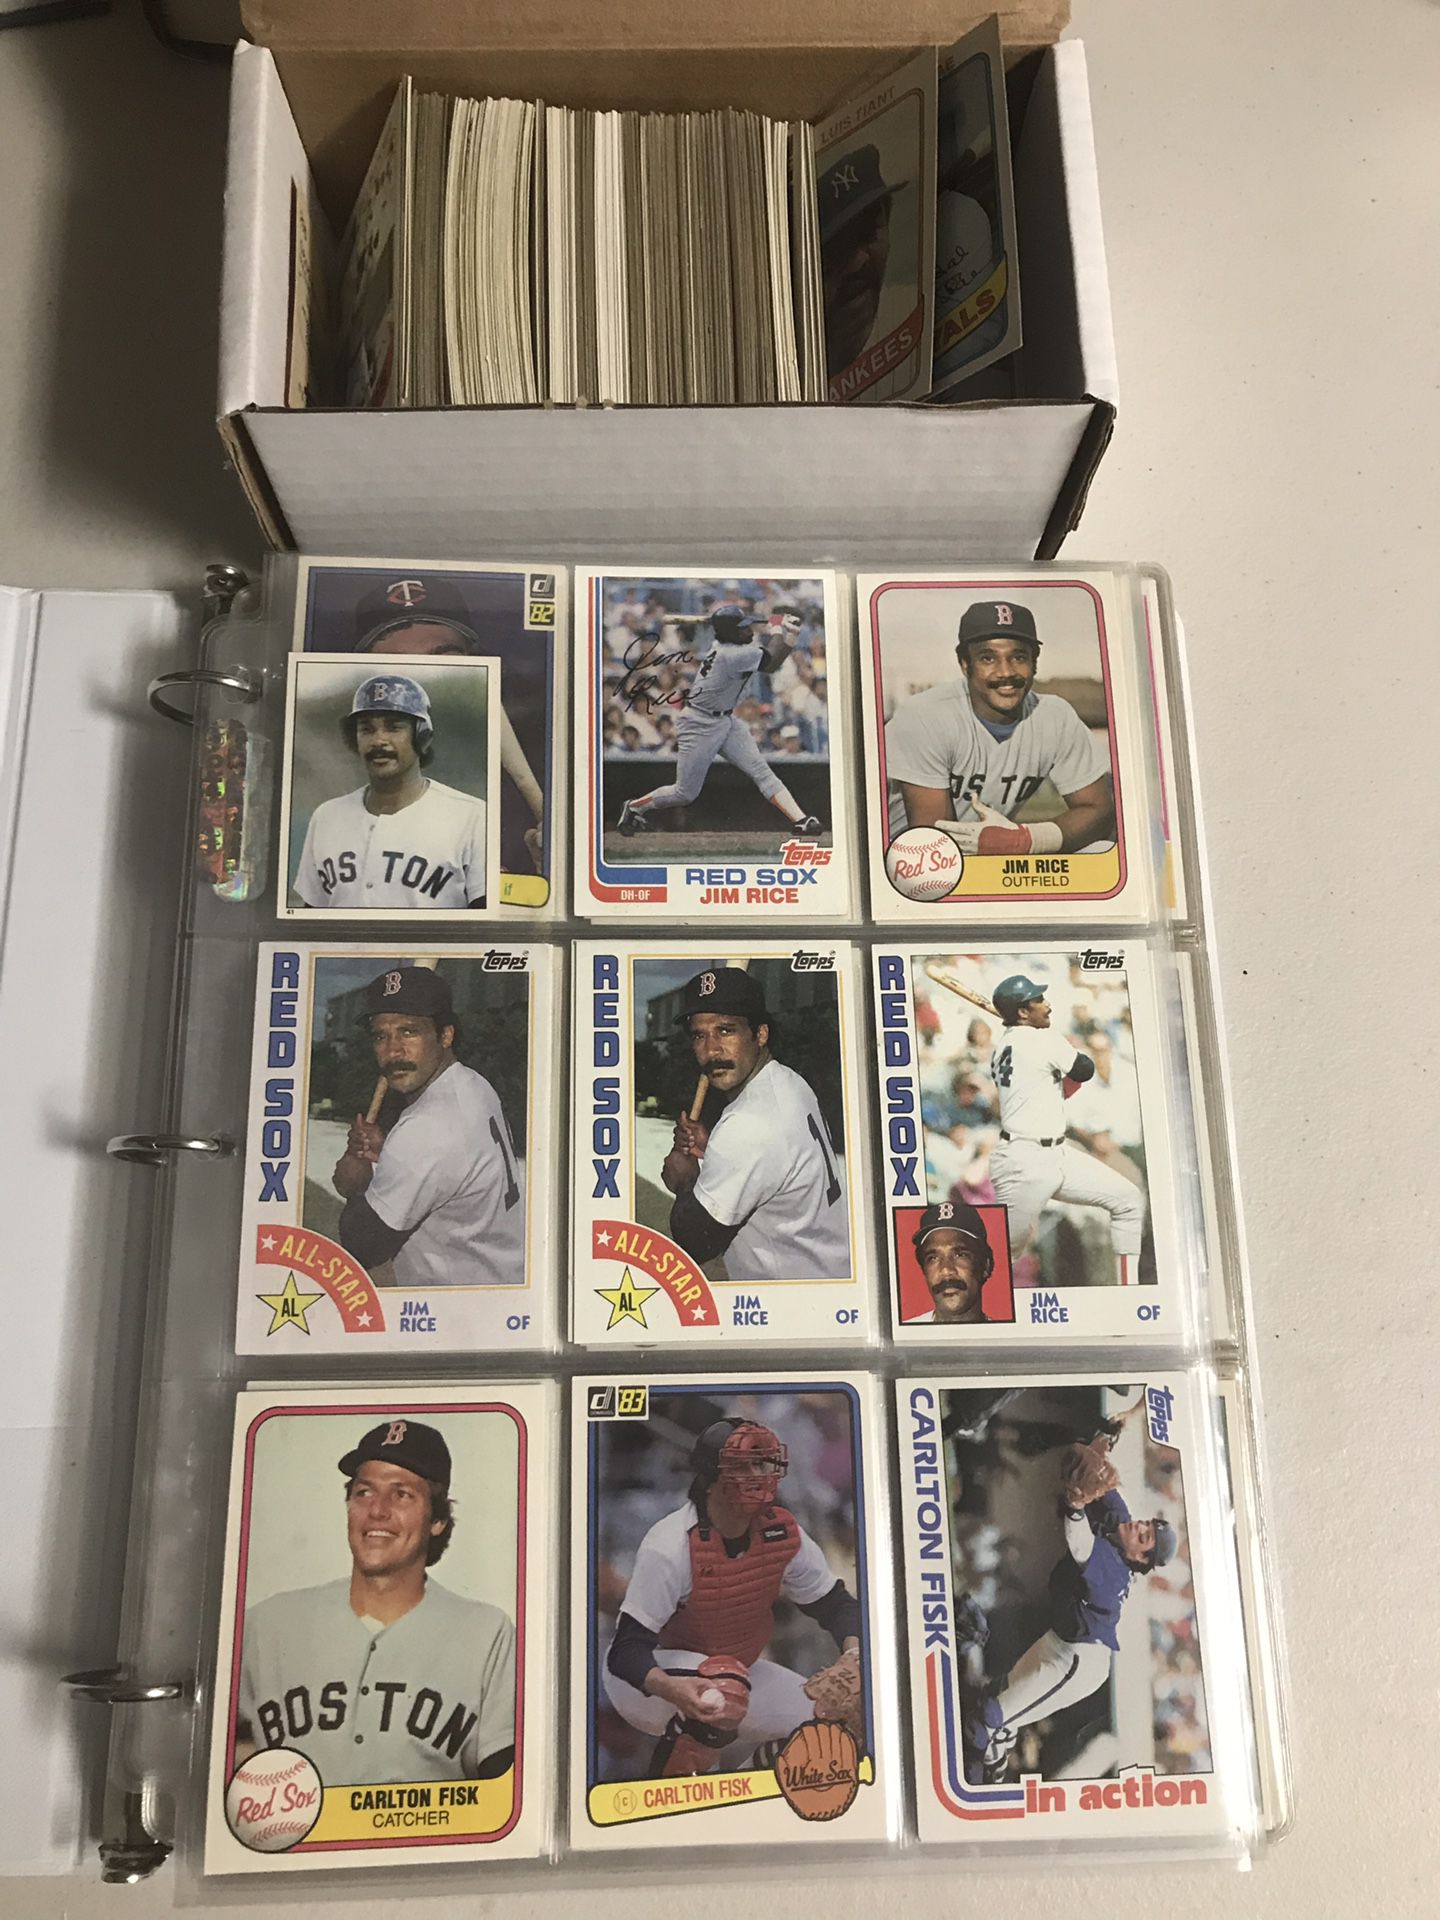 Vintage baseball cards from 1979-1984